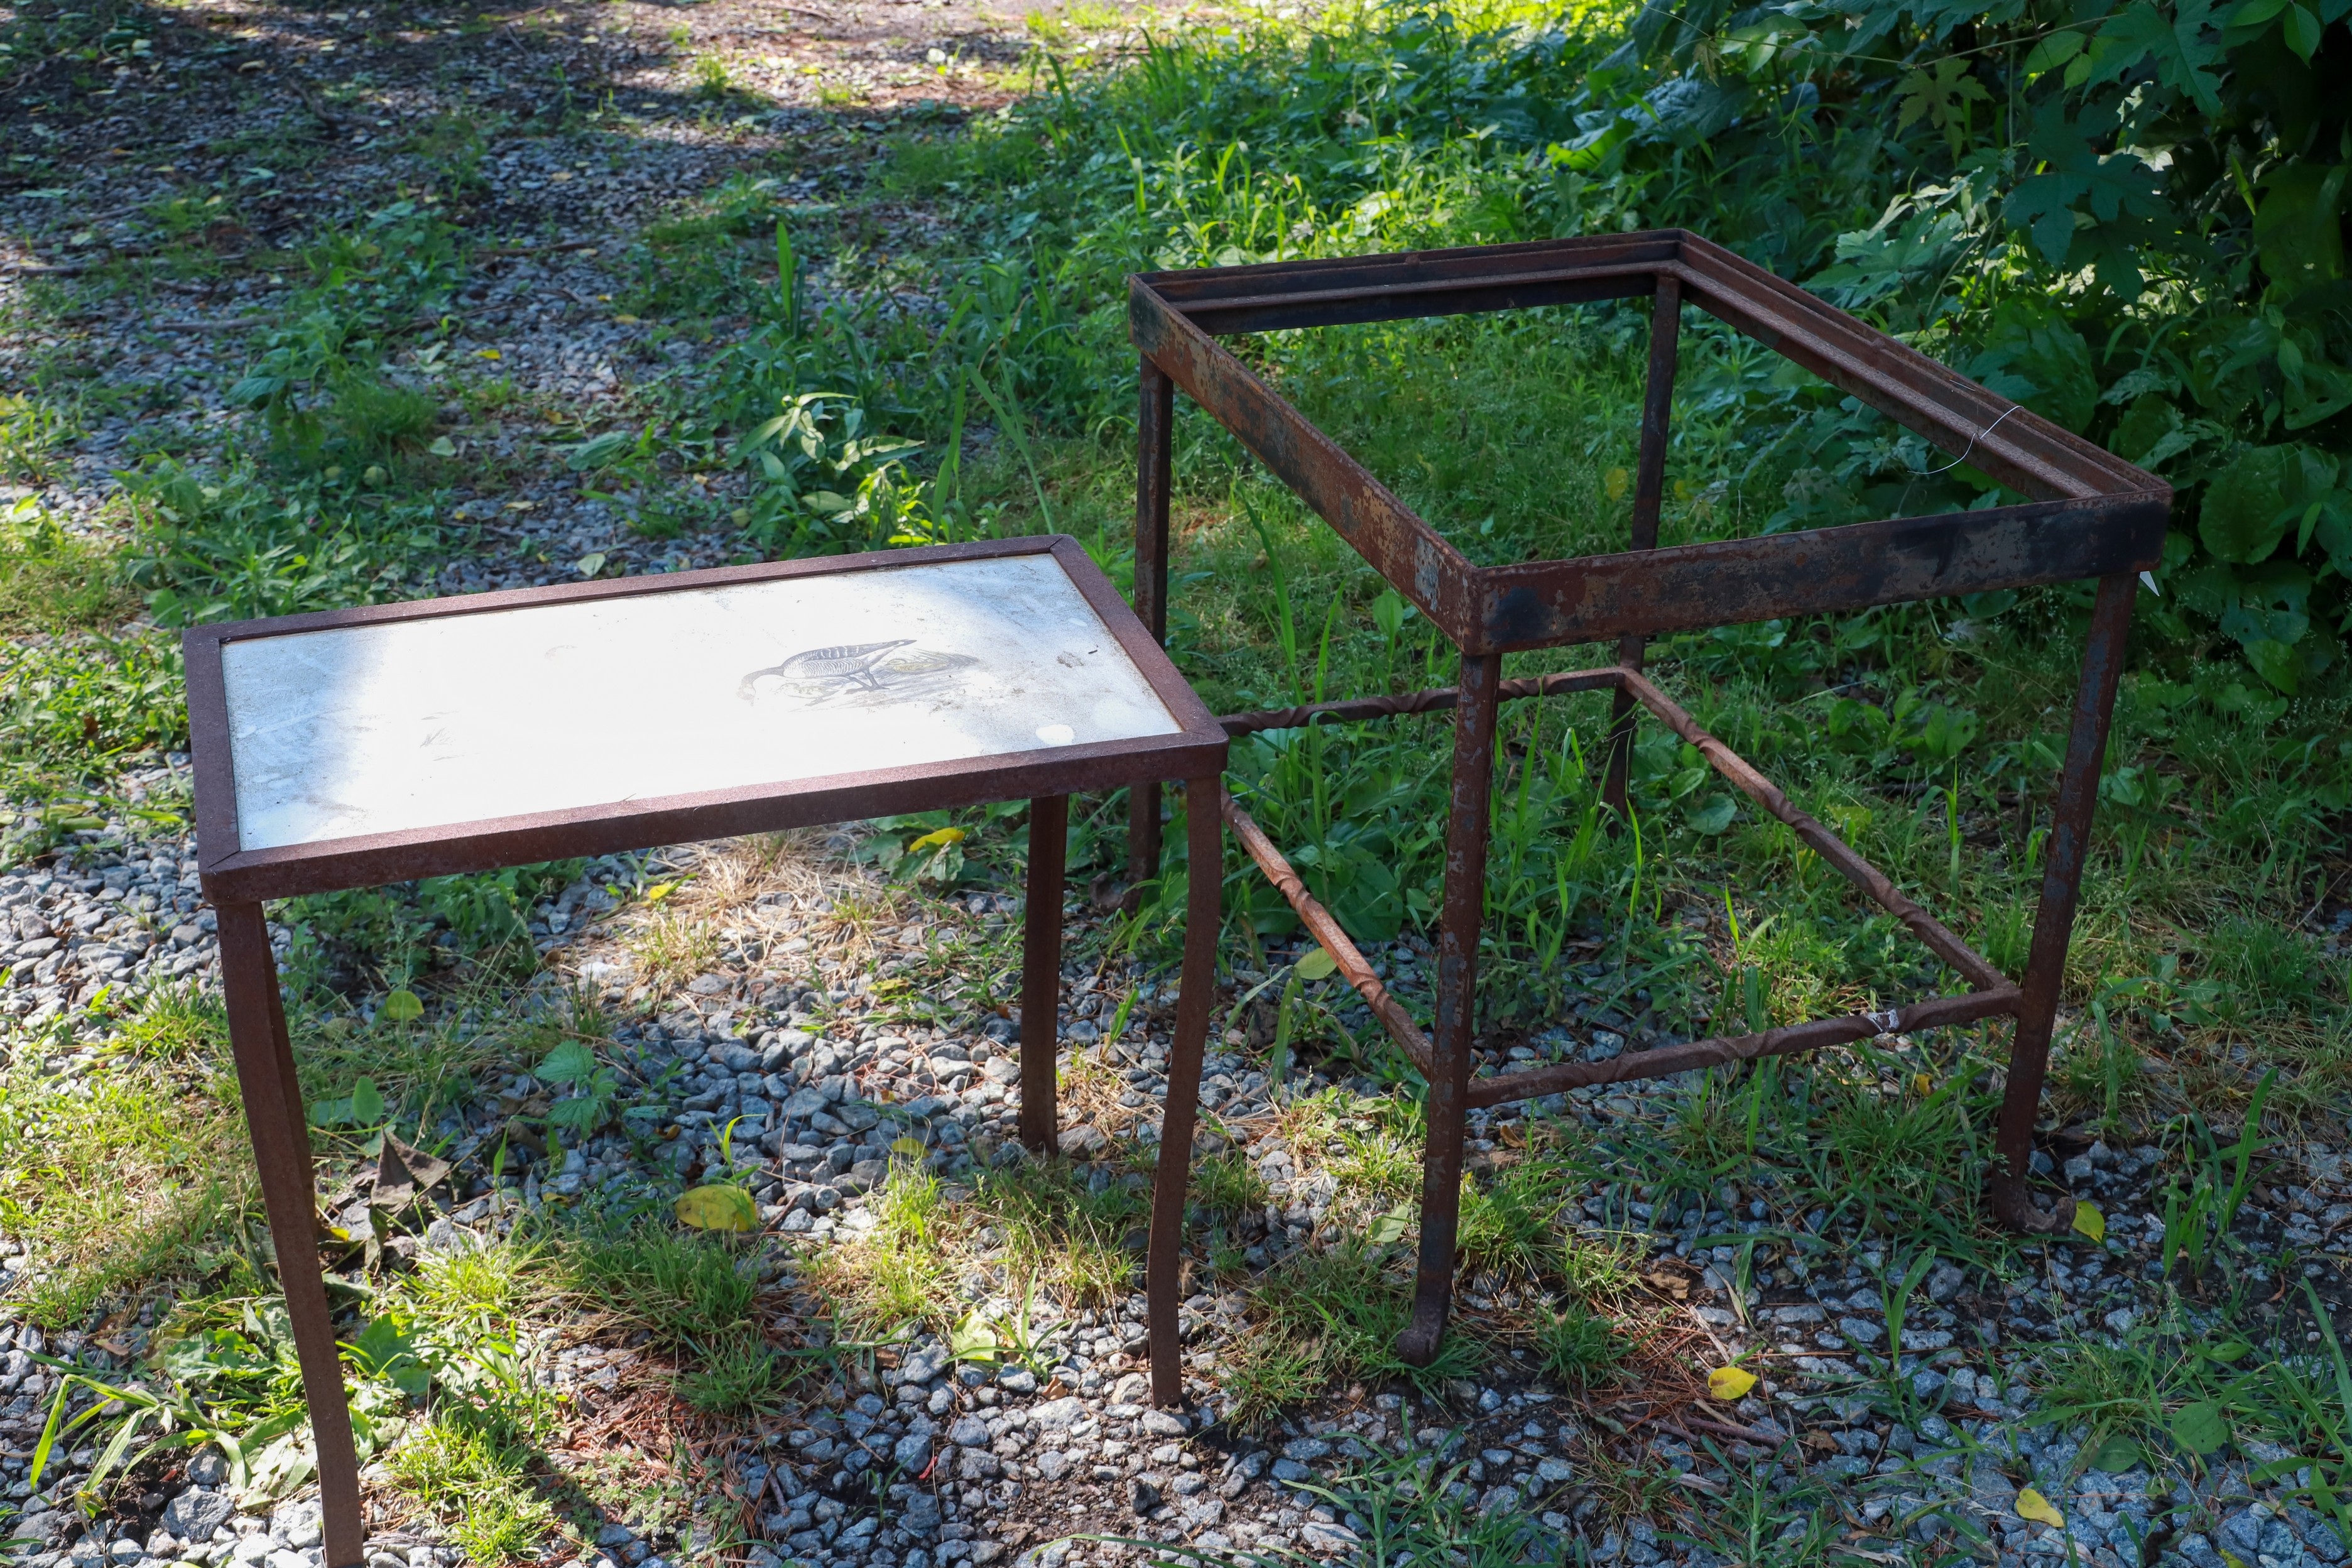  2 Iron side tables one with 3b63b0